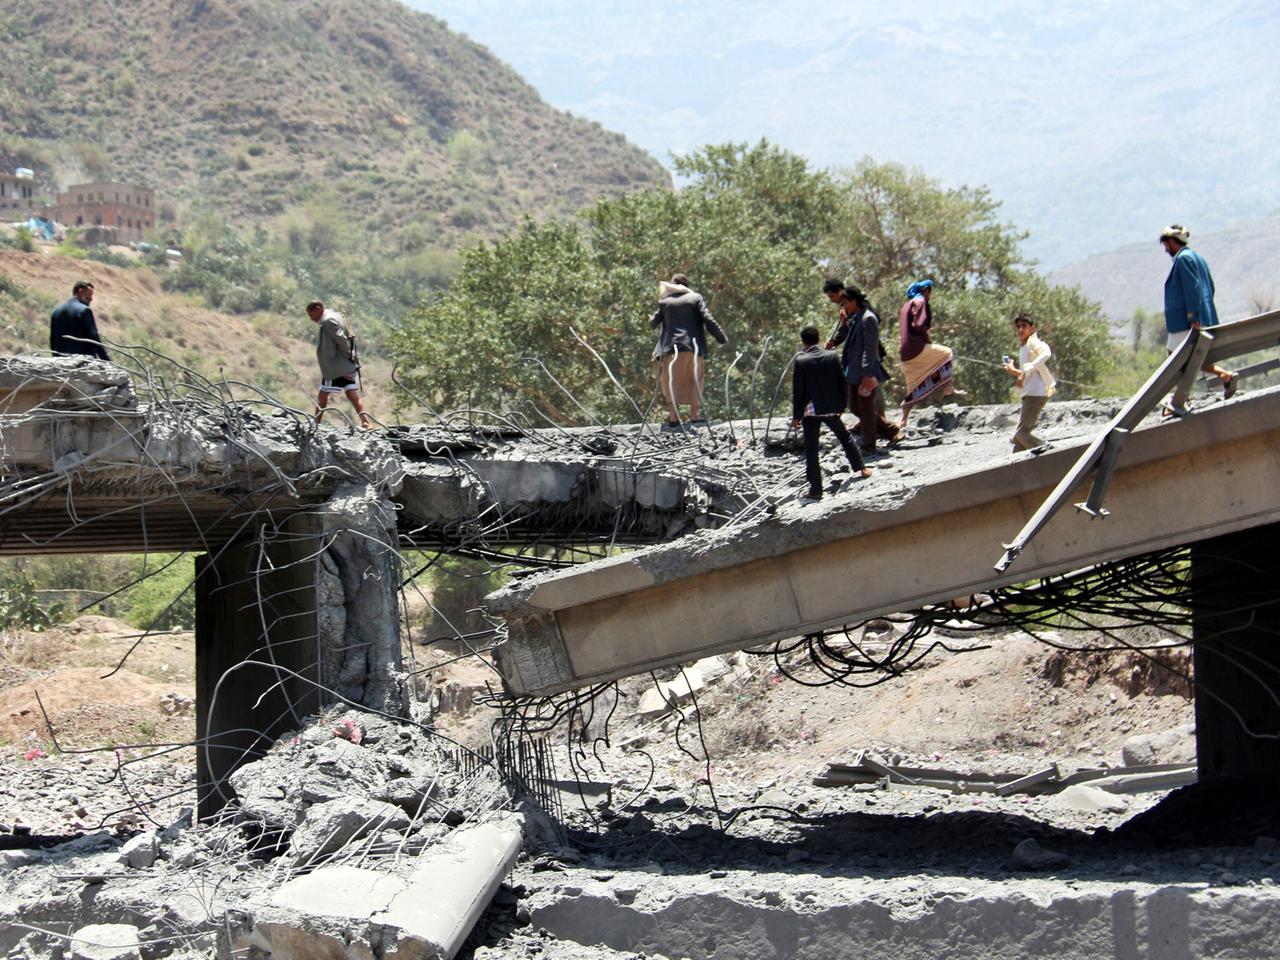 Yemenis stand on a bridge allegedly hit by an airstrike carried out by the Saudi-led coalition near the central city of Ibb, Yemen, 21 April 2015.